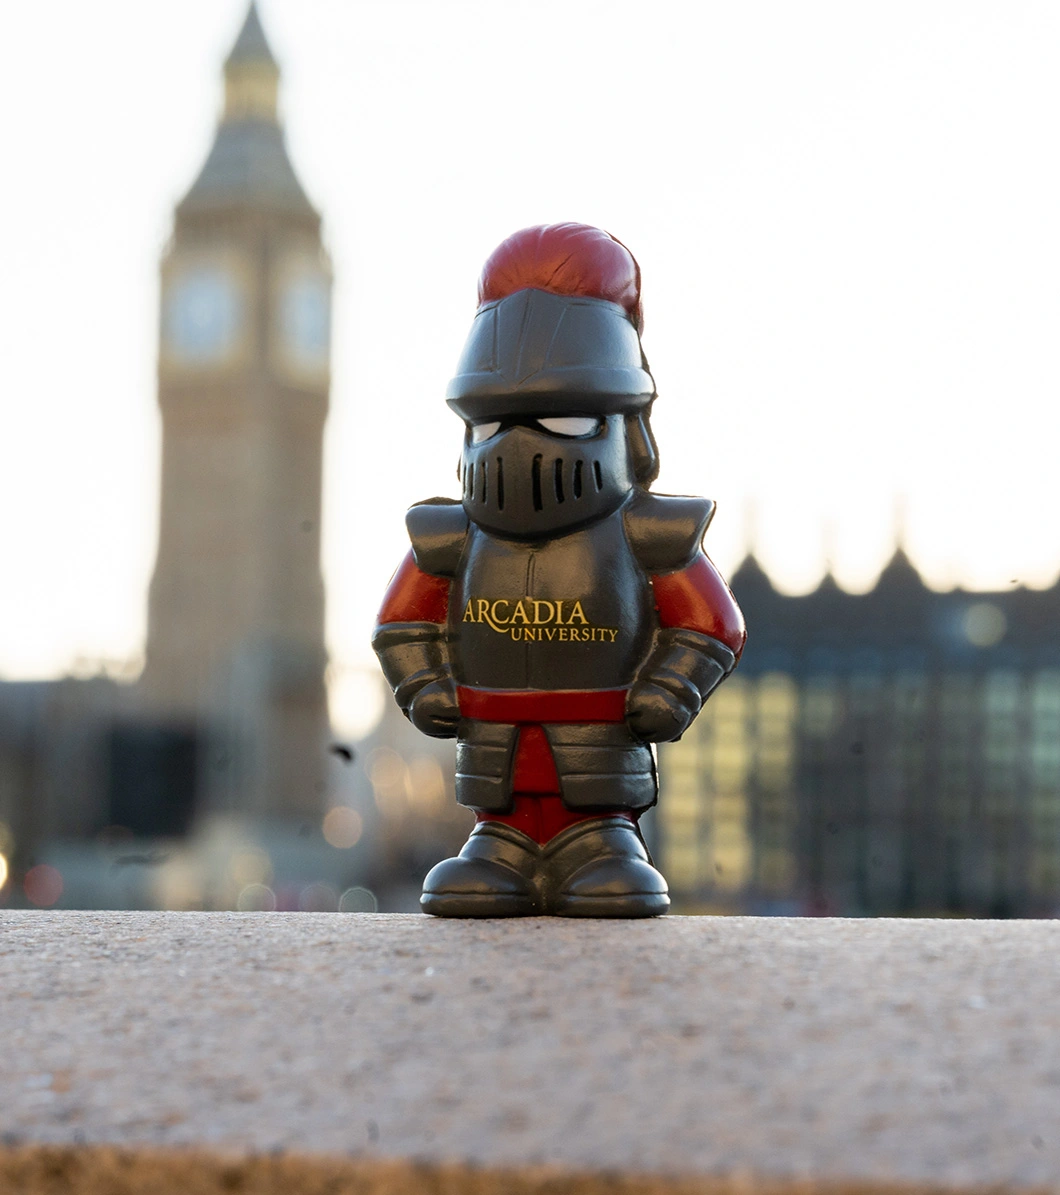 A small version, a toy of Archie in London by the Tower of London.